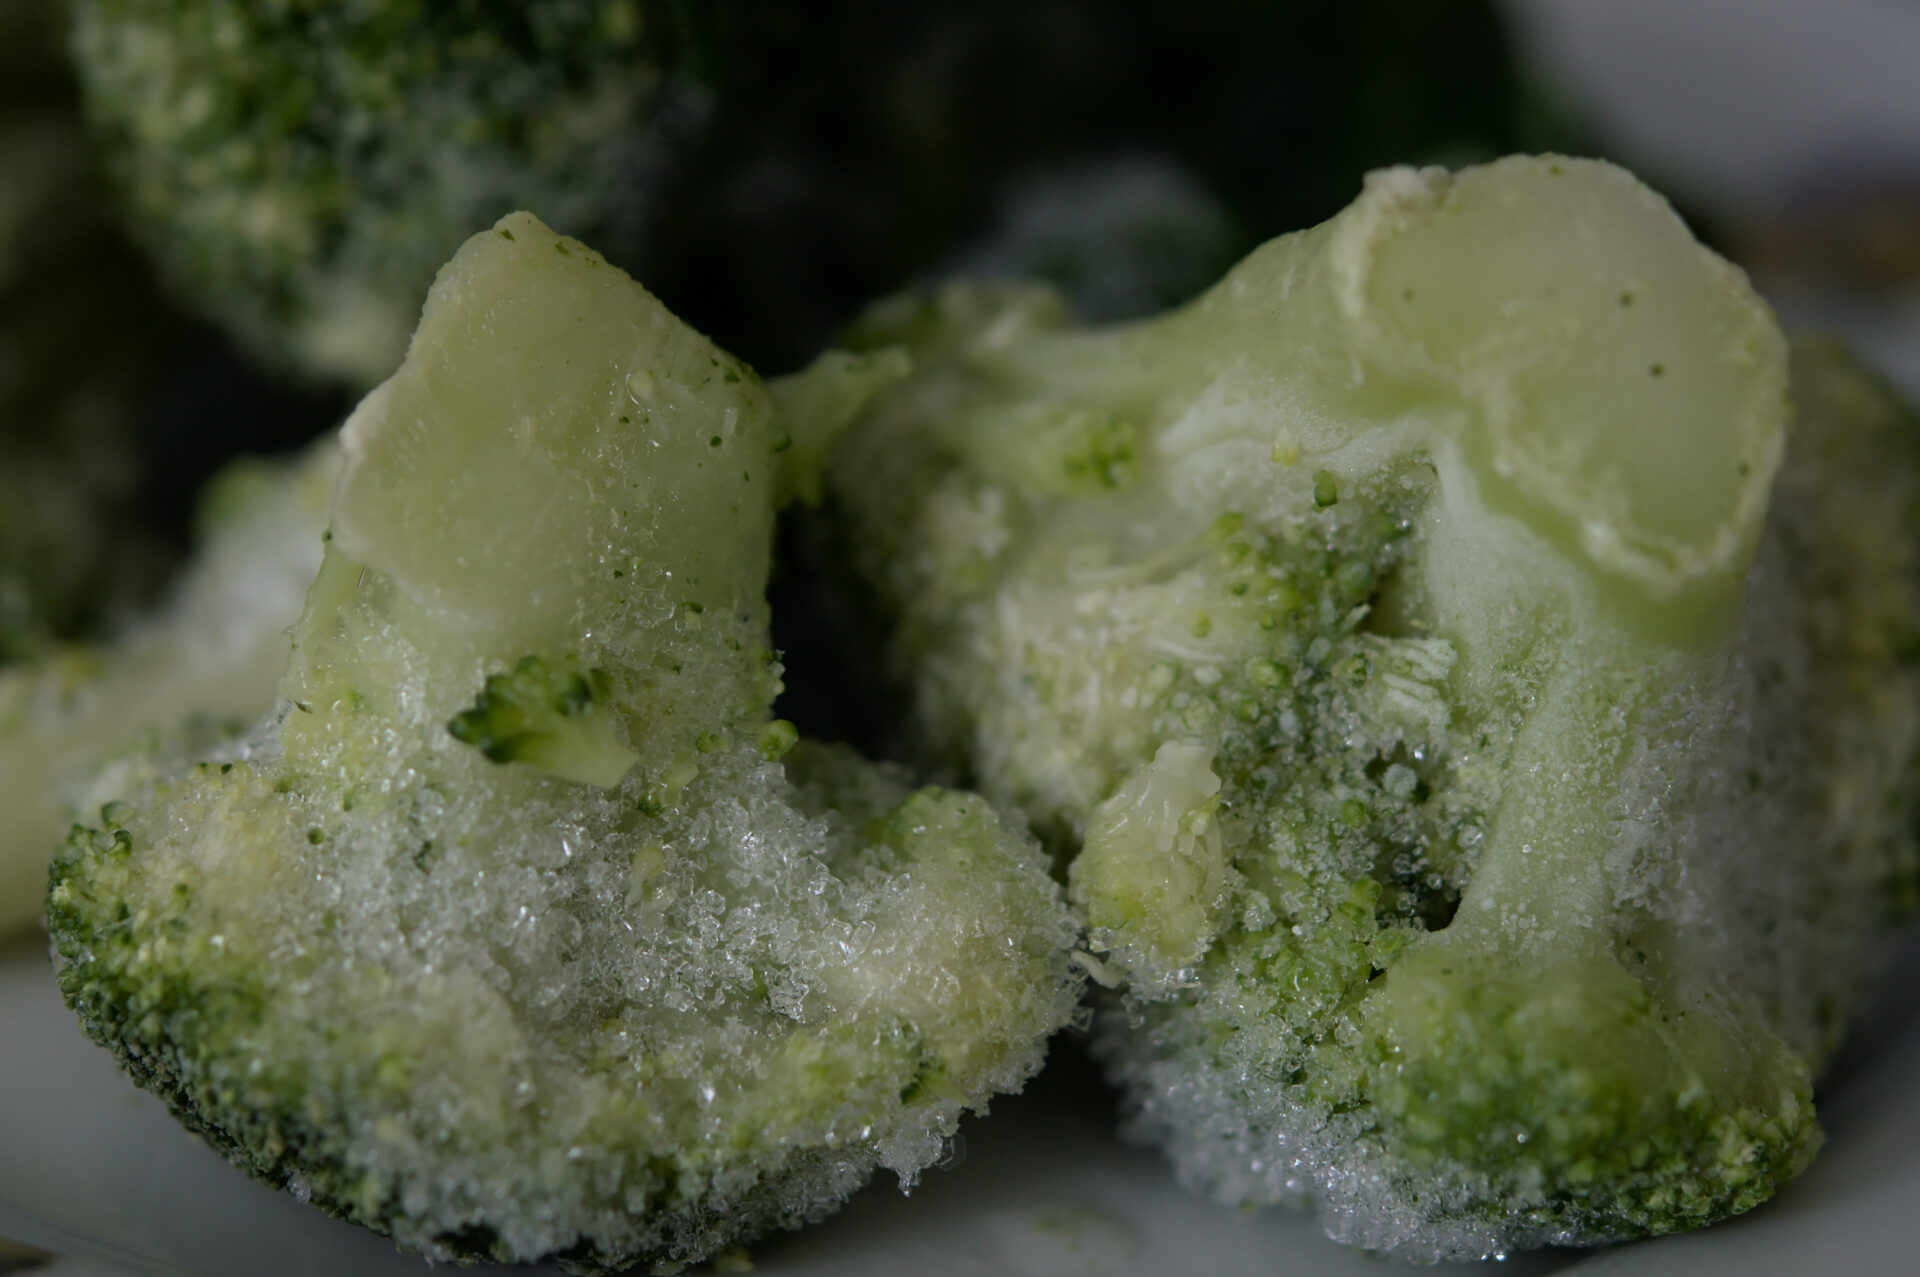 Broccoli, brimming with Vitamin C, retains its vital nutrients even post freeze-drying.